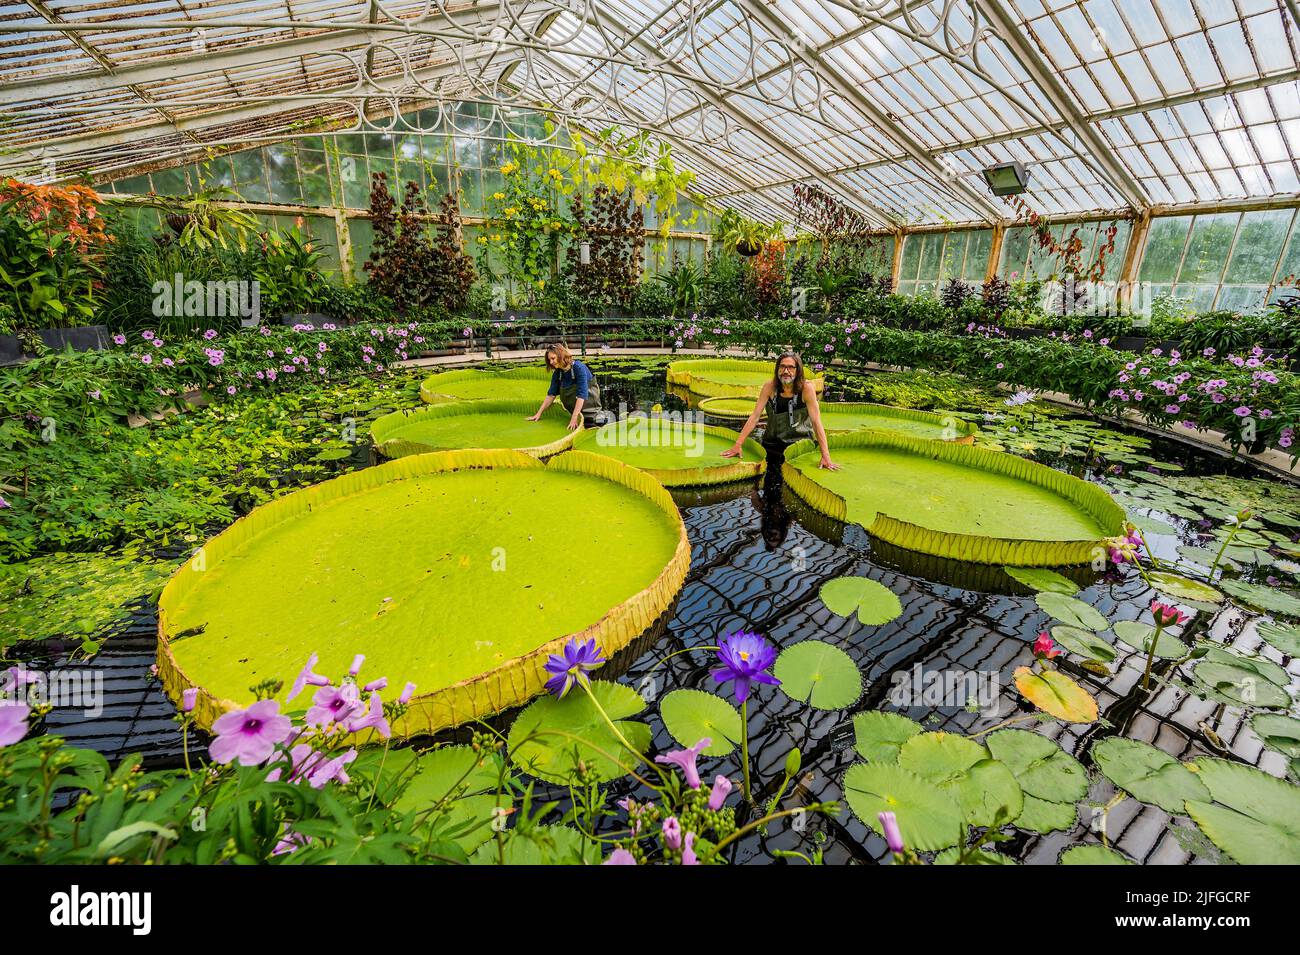 EMBARGOED till 05:00 BST Monday 4 July 2022 - London, UK. 3 Jul 2022. A giant waterlily grown in the Waterlilly House at Kew Gardens has been named, Victoria boliviana, new to science based on a paper, published today (04/07/22) in the journal Frontiers in Plant Science - condensing years of investigation, by a team headed by Kew's Carlos Magdalena (pictured), botanical artist Lucy Smith (pictured), and biodiversity genomics researcher Natalia Przelomska, alongside partners from the National Herbarium of Bolivia, Santa Cruz de La Sierra Botanic Garden and La Rinconada Gardens. Victoria bolivia Stock Photo